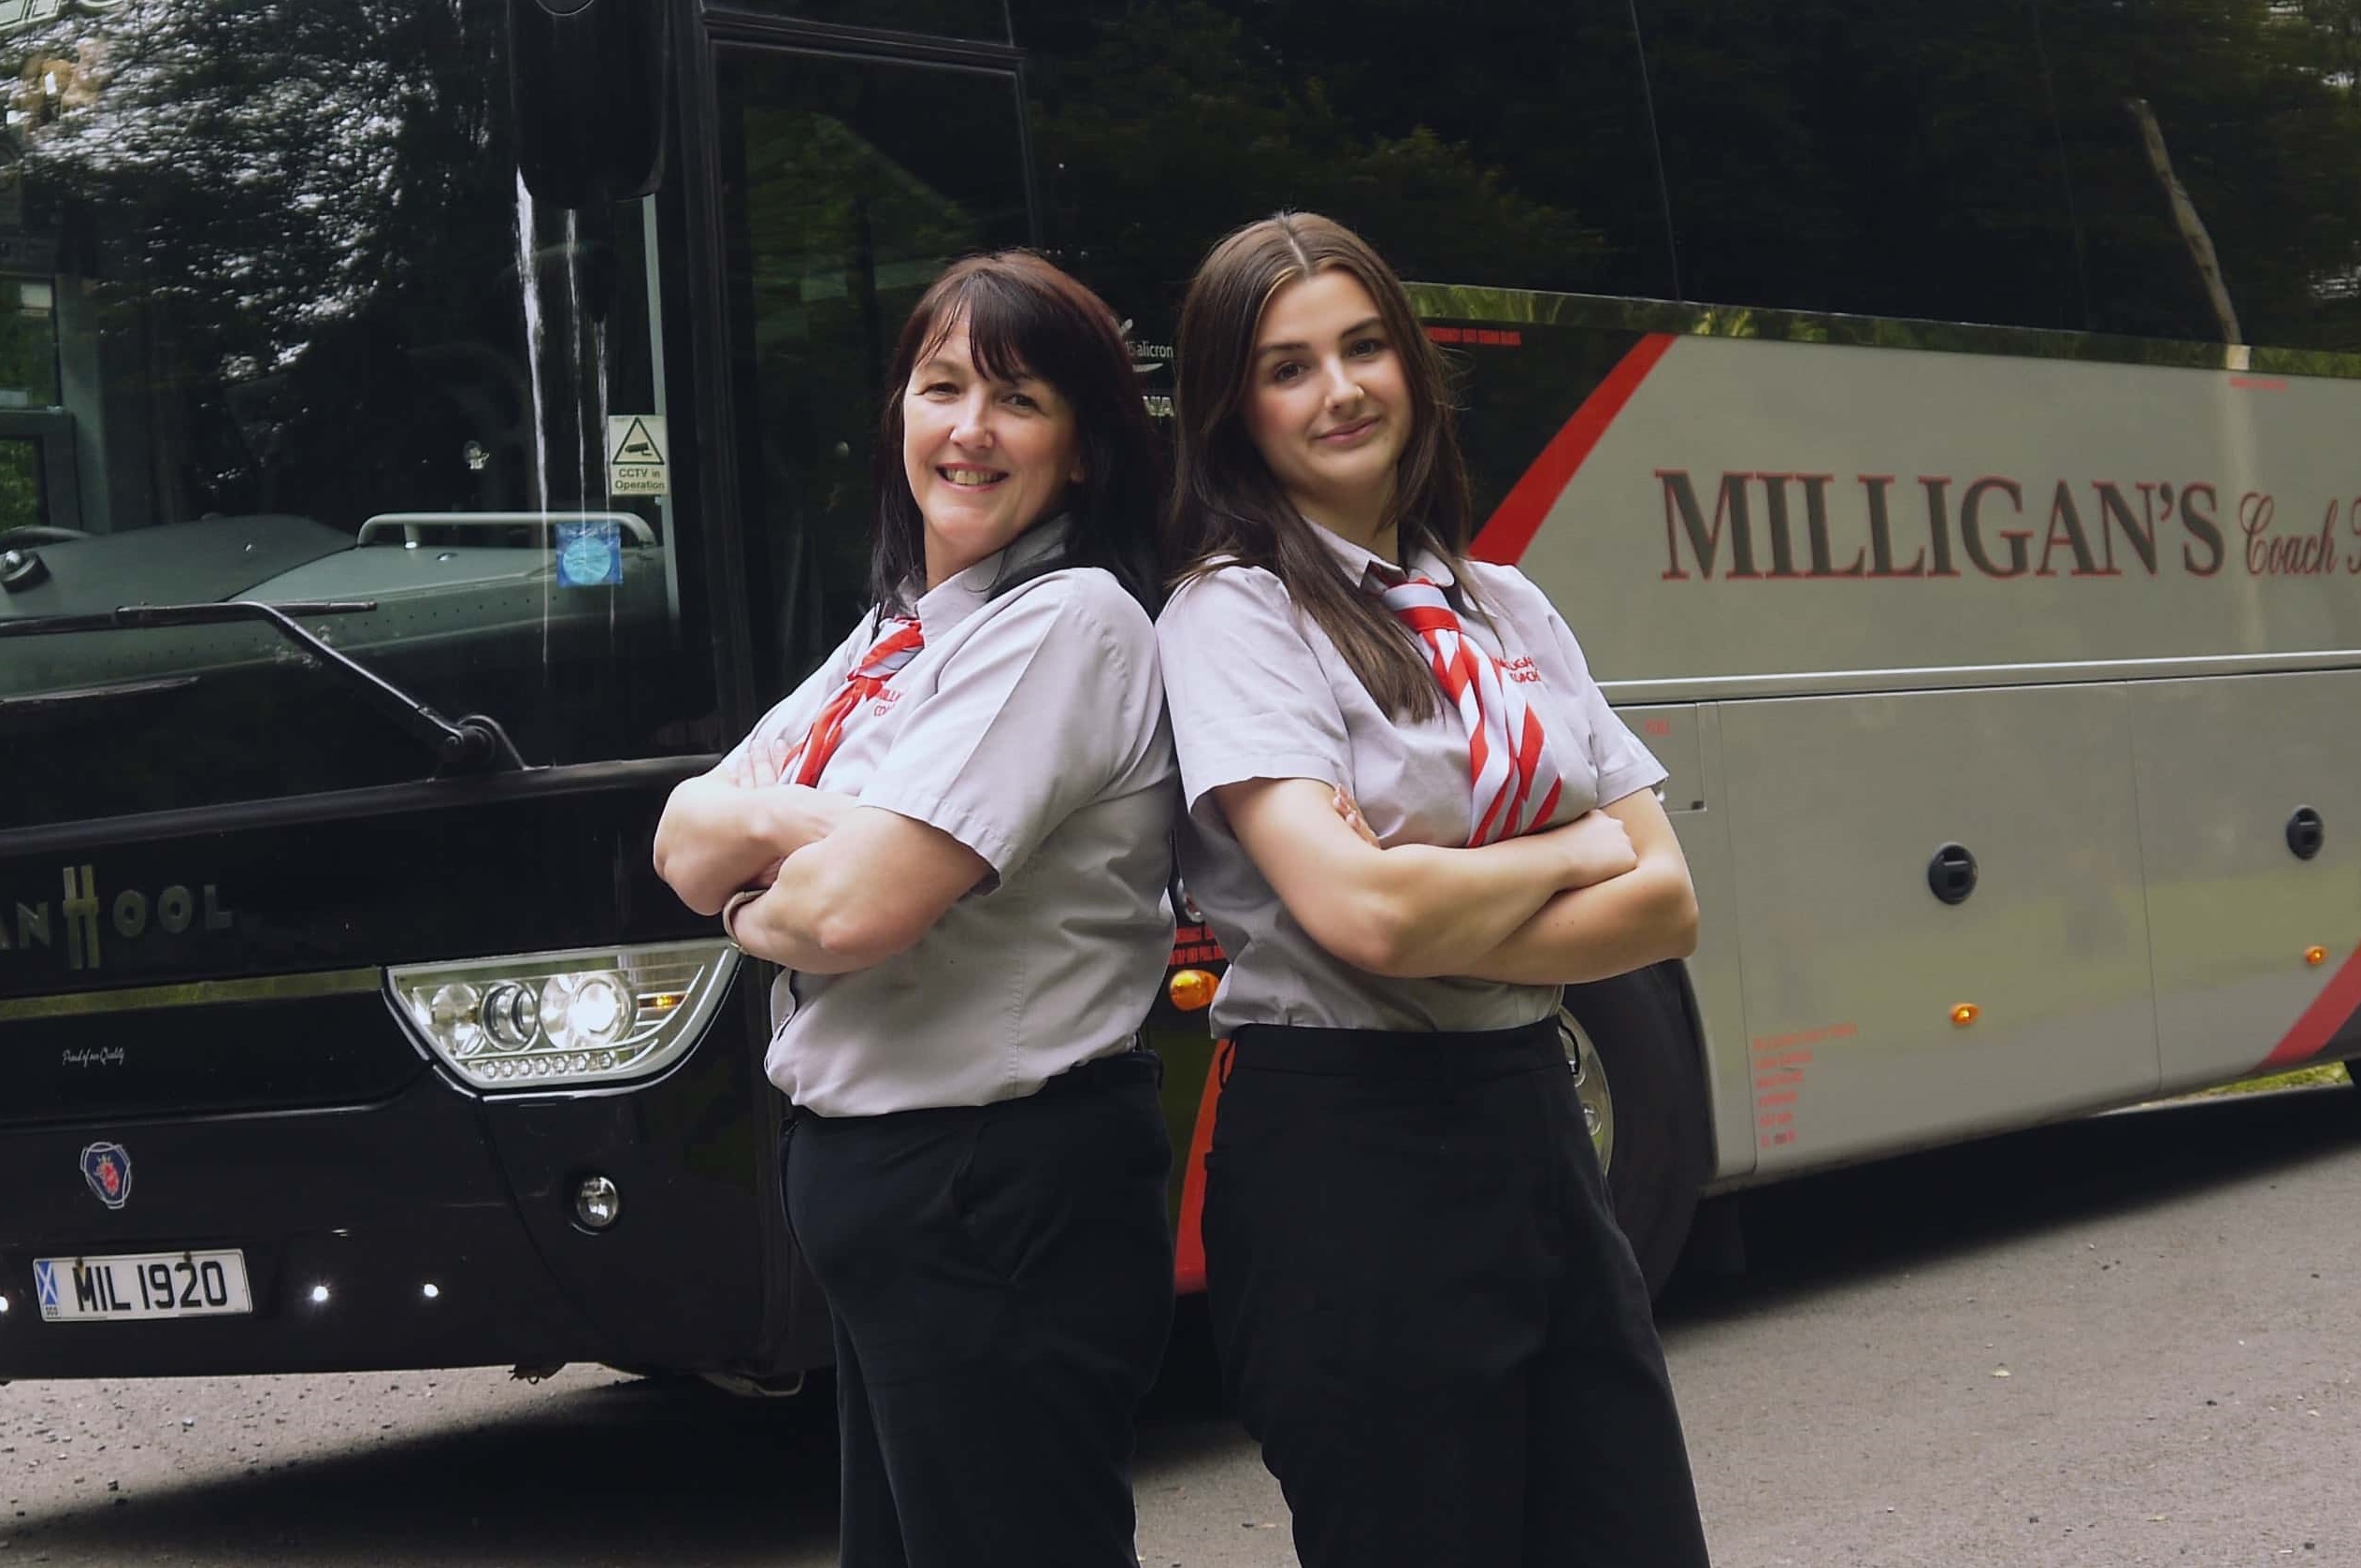 Morag and Lynsey Milligan of Milligan's Coach Travel